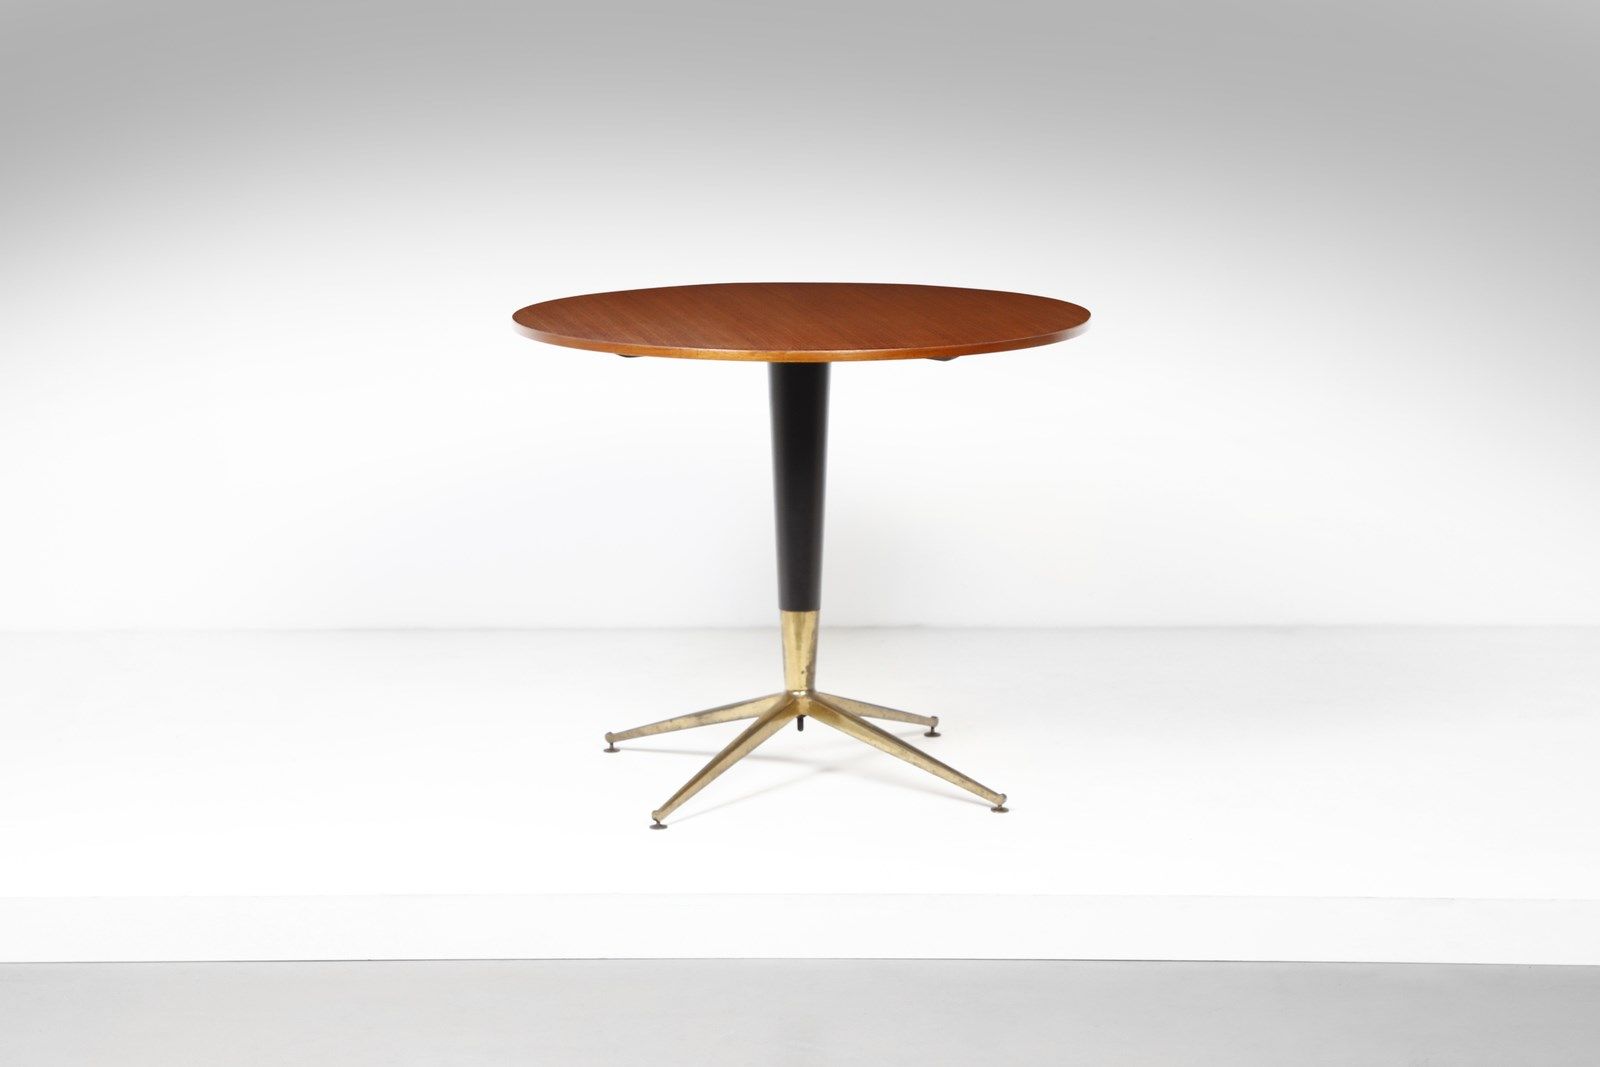 BEGA MELCHIORRE (1898 - 1976) MELCHIORRE Table. Brass, painted metal and wood. C&hellip;